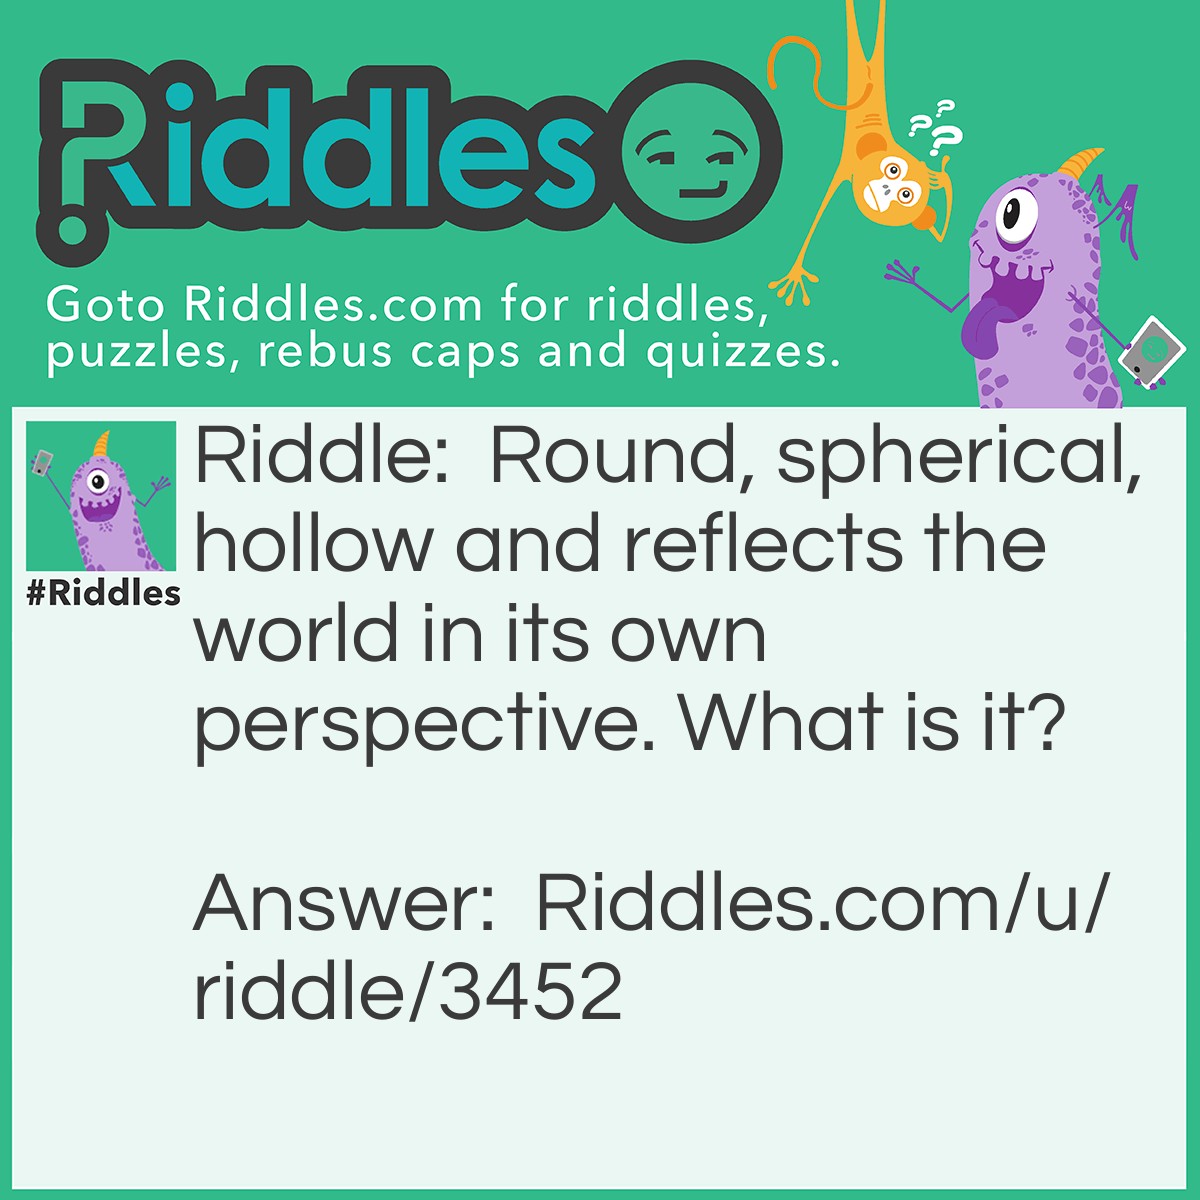 Riddle: Round, spherical, hollow and reflects the world in its own perspective. What is it? Answer: A bubble.